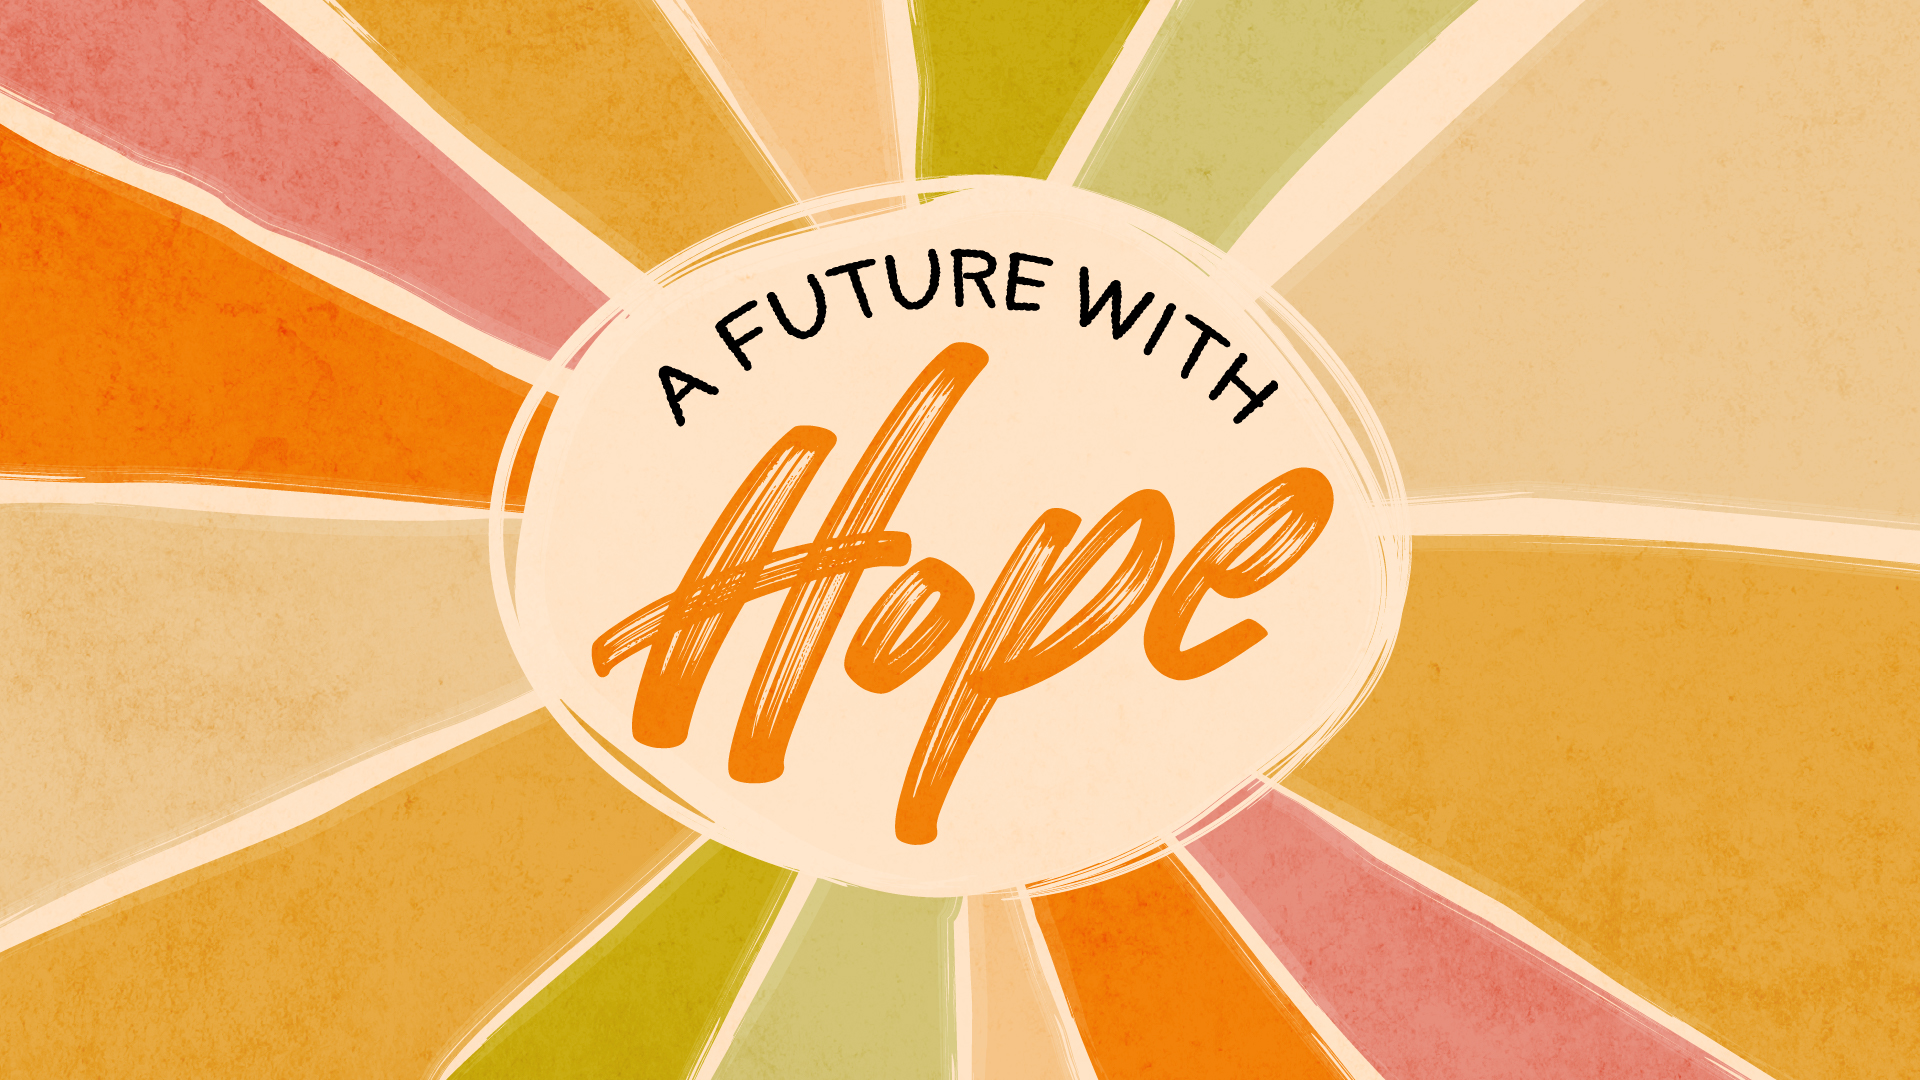 Sunday Worship: Envisioning A Future With Hope